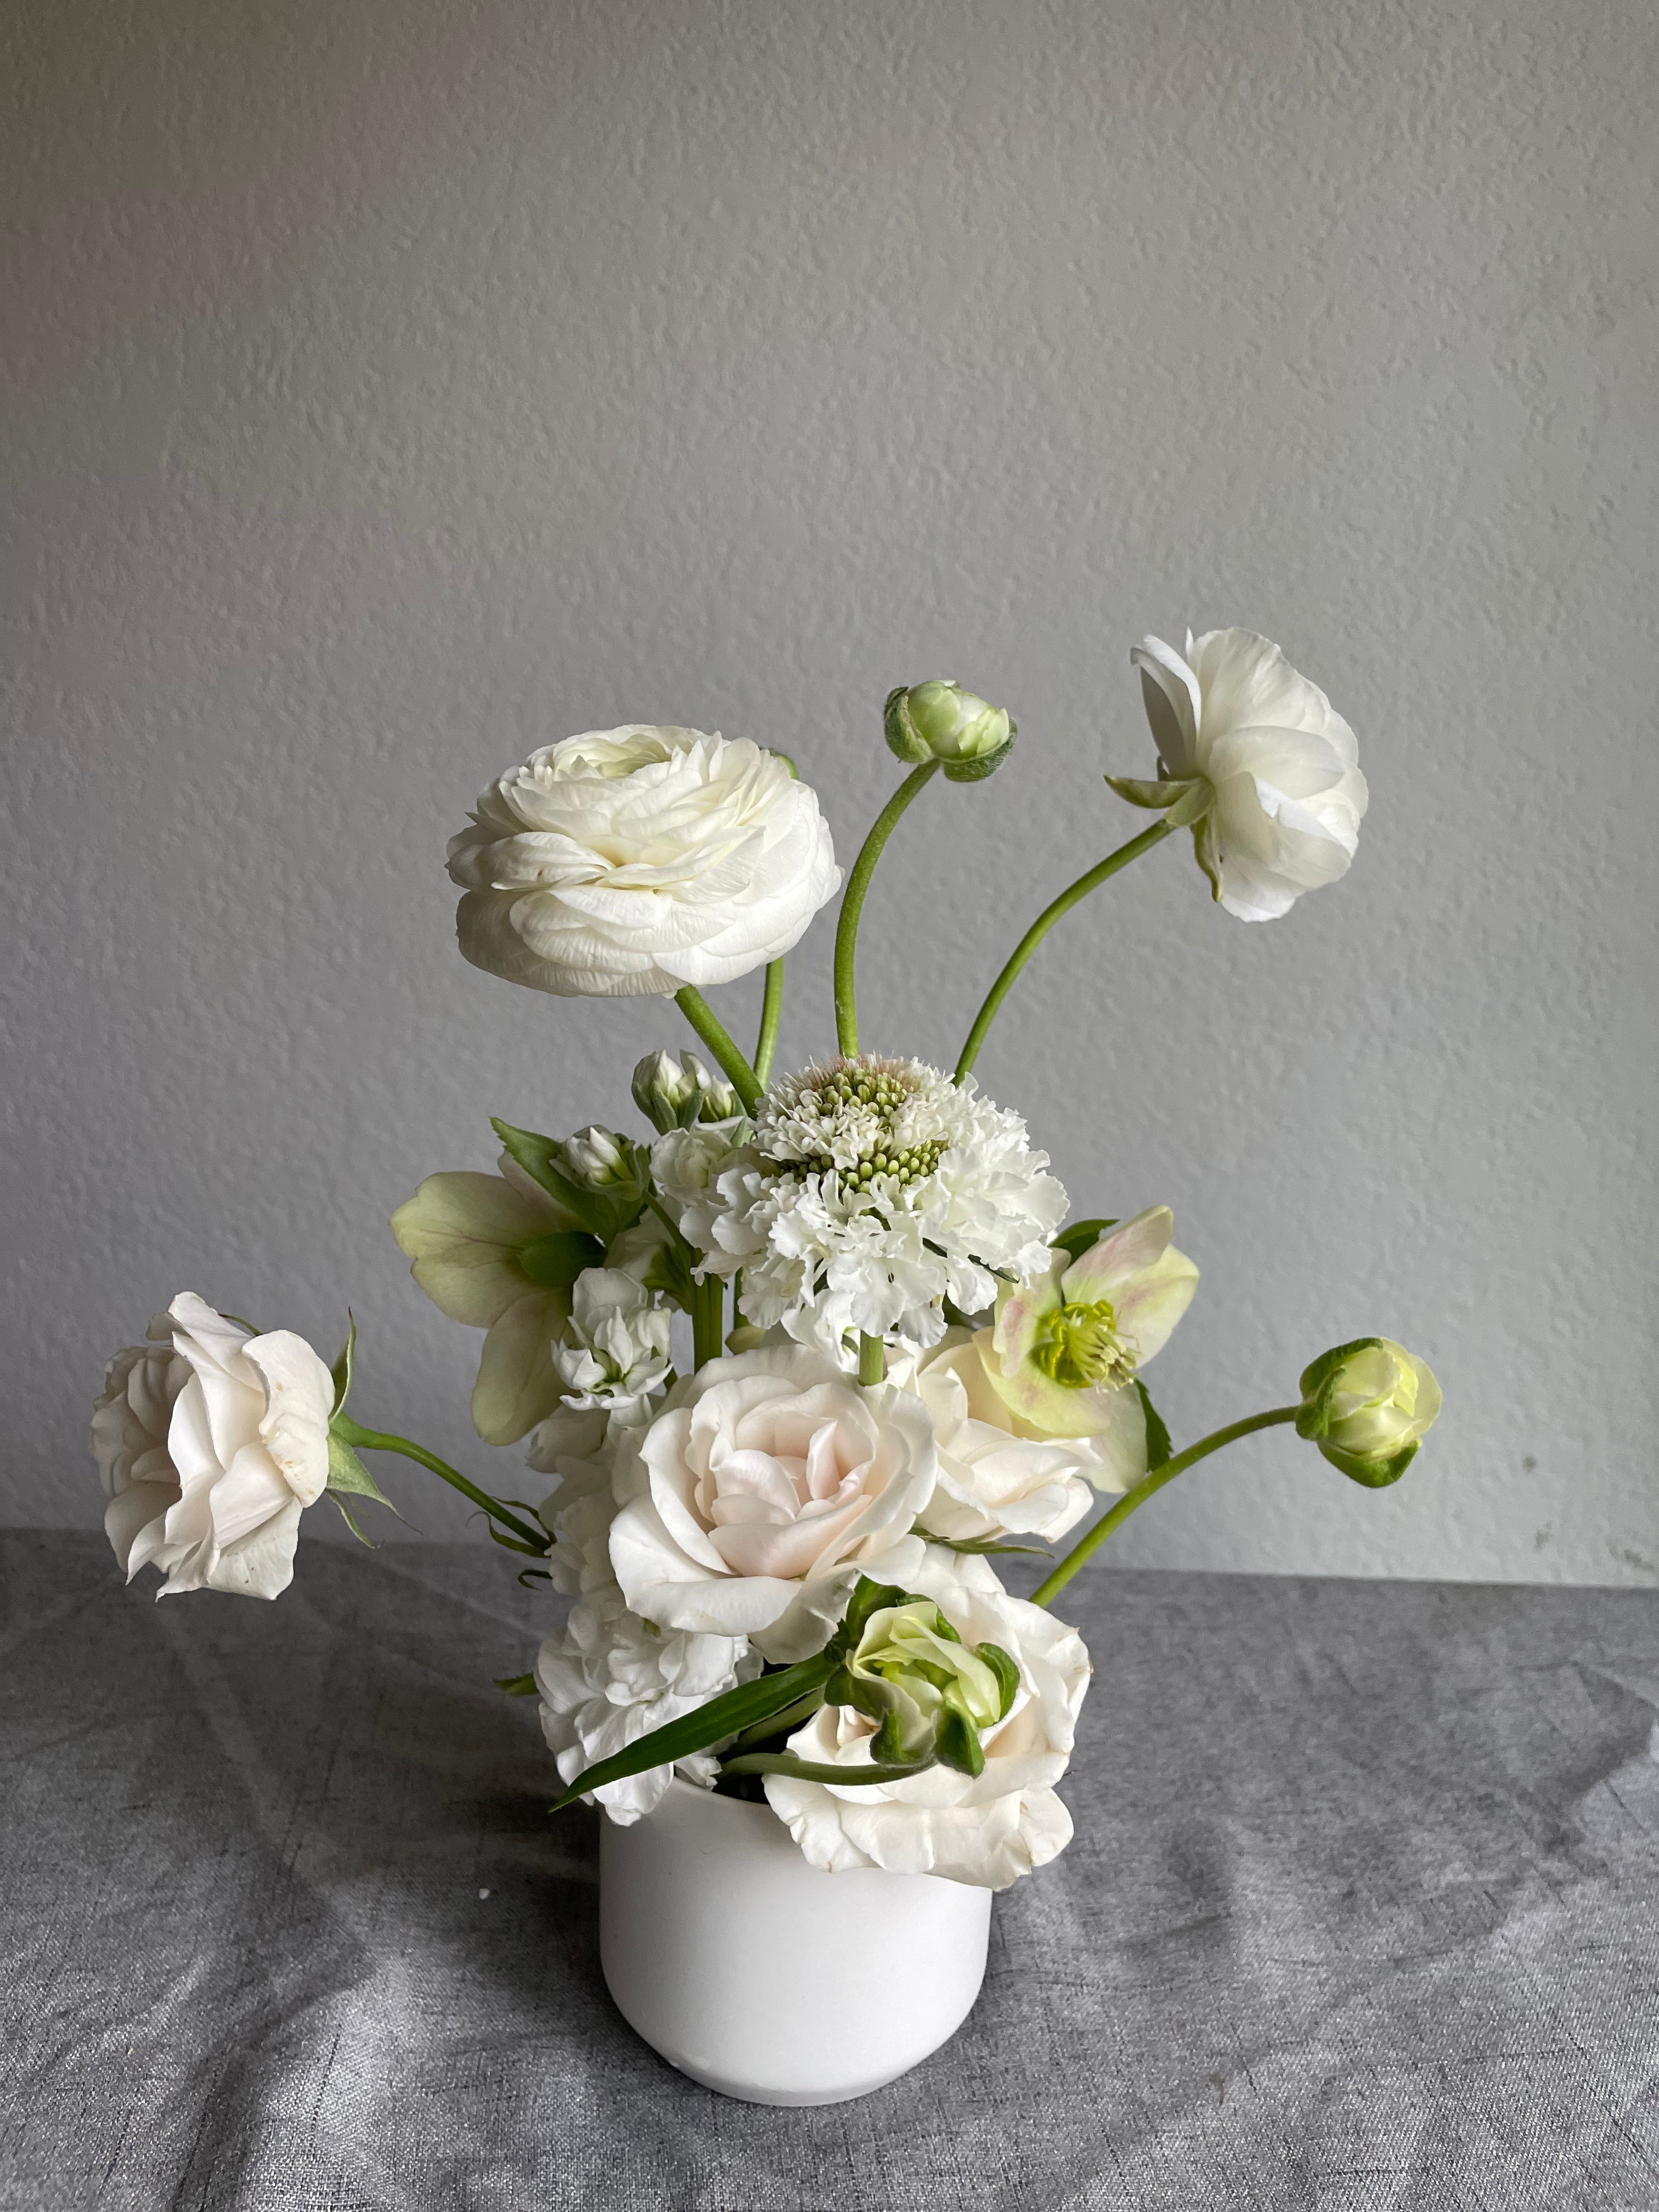 classic white and green seasonal floral arrangement